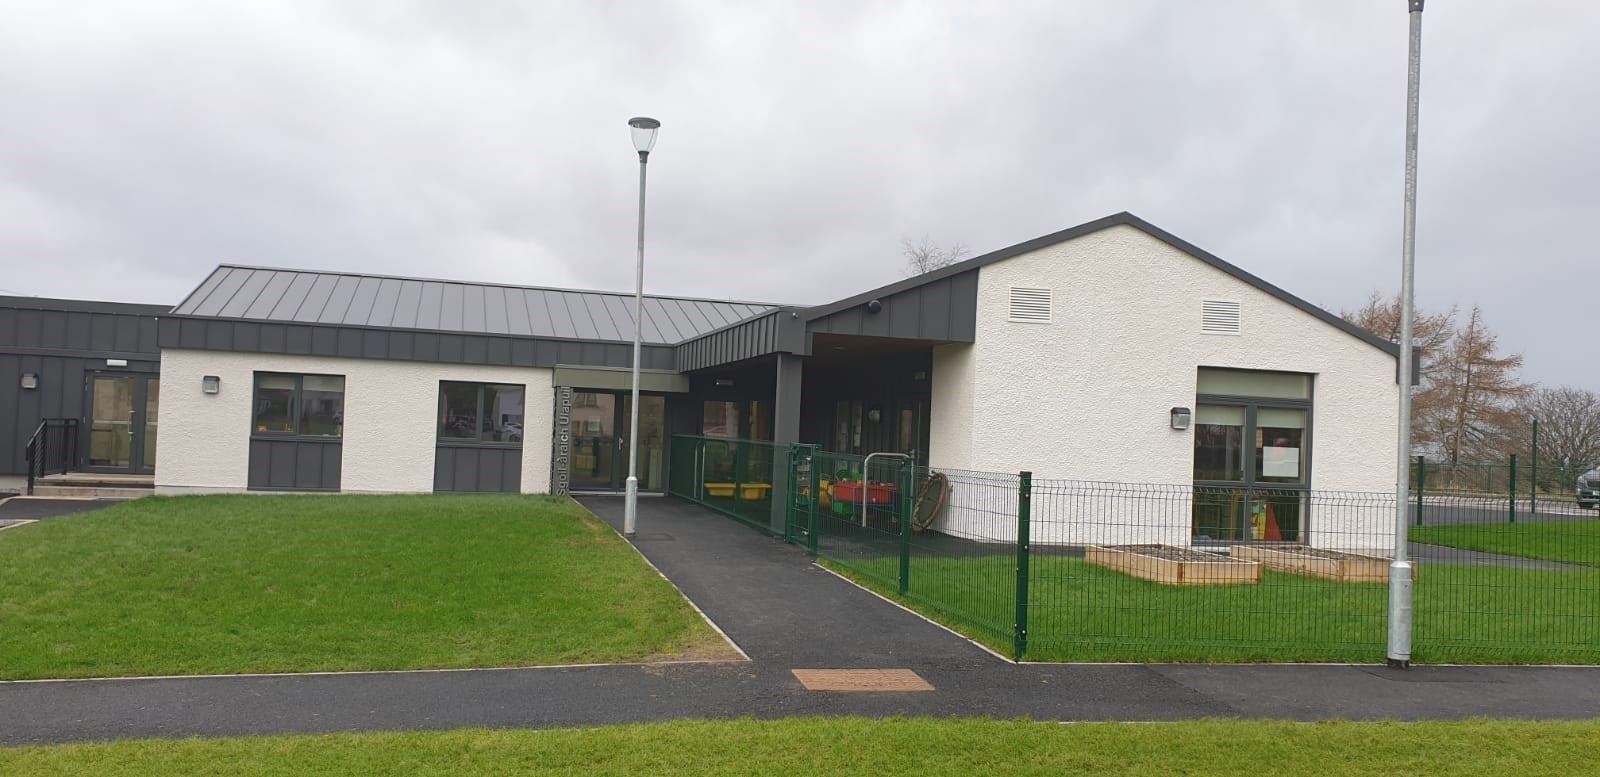 The new £1m Ullapool nursery has been hailed by Highland Council.